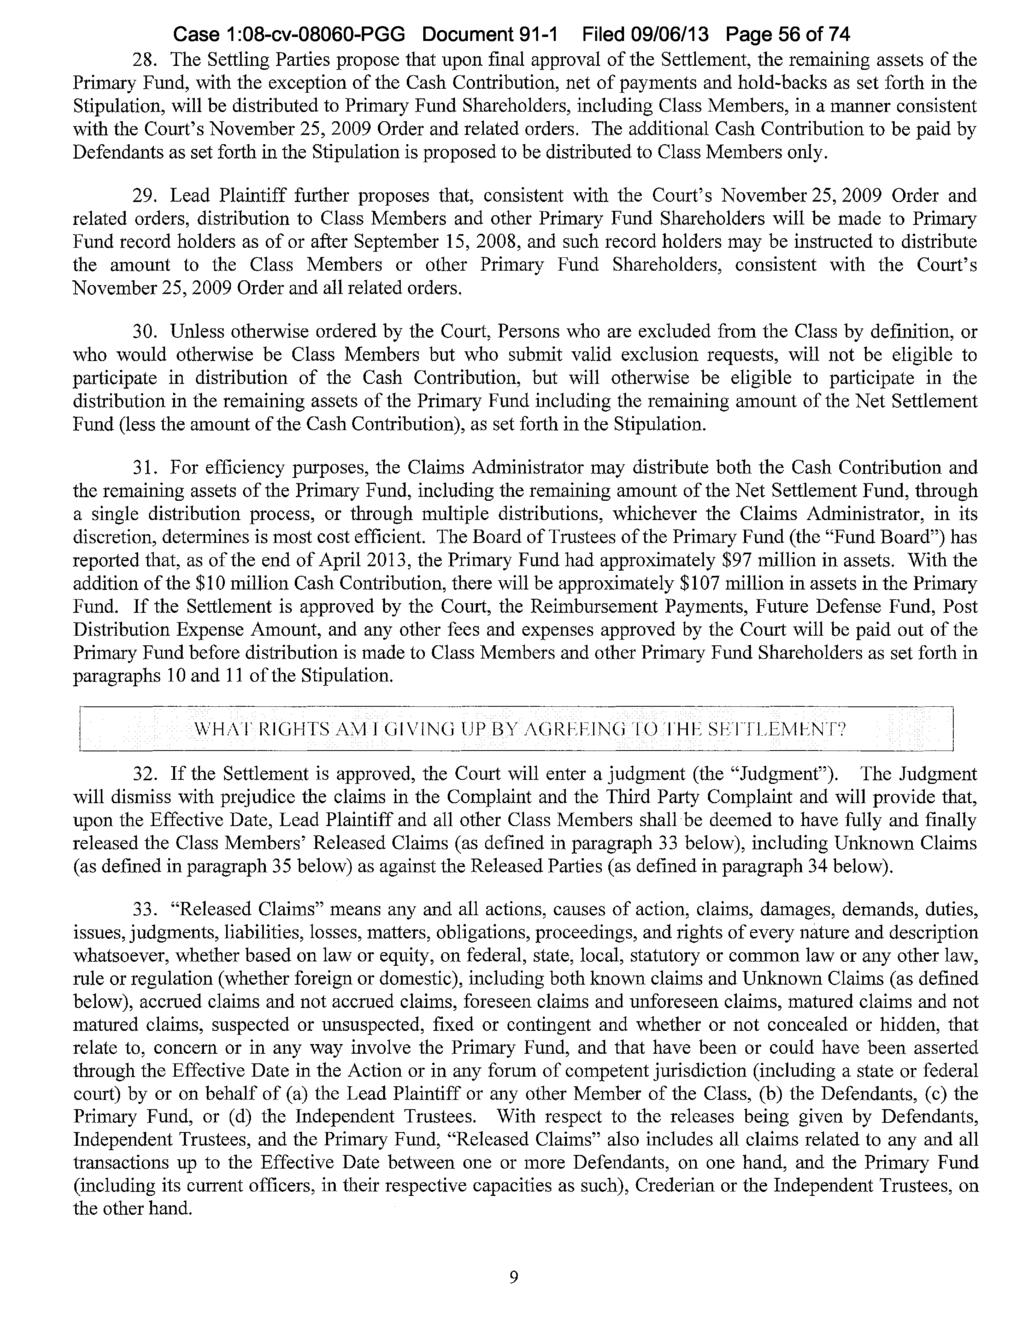 Case 1:08-cv-08060-PGG Document 91-1 Filed 09/06/13 Page 56 of 74 28.